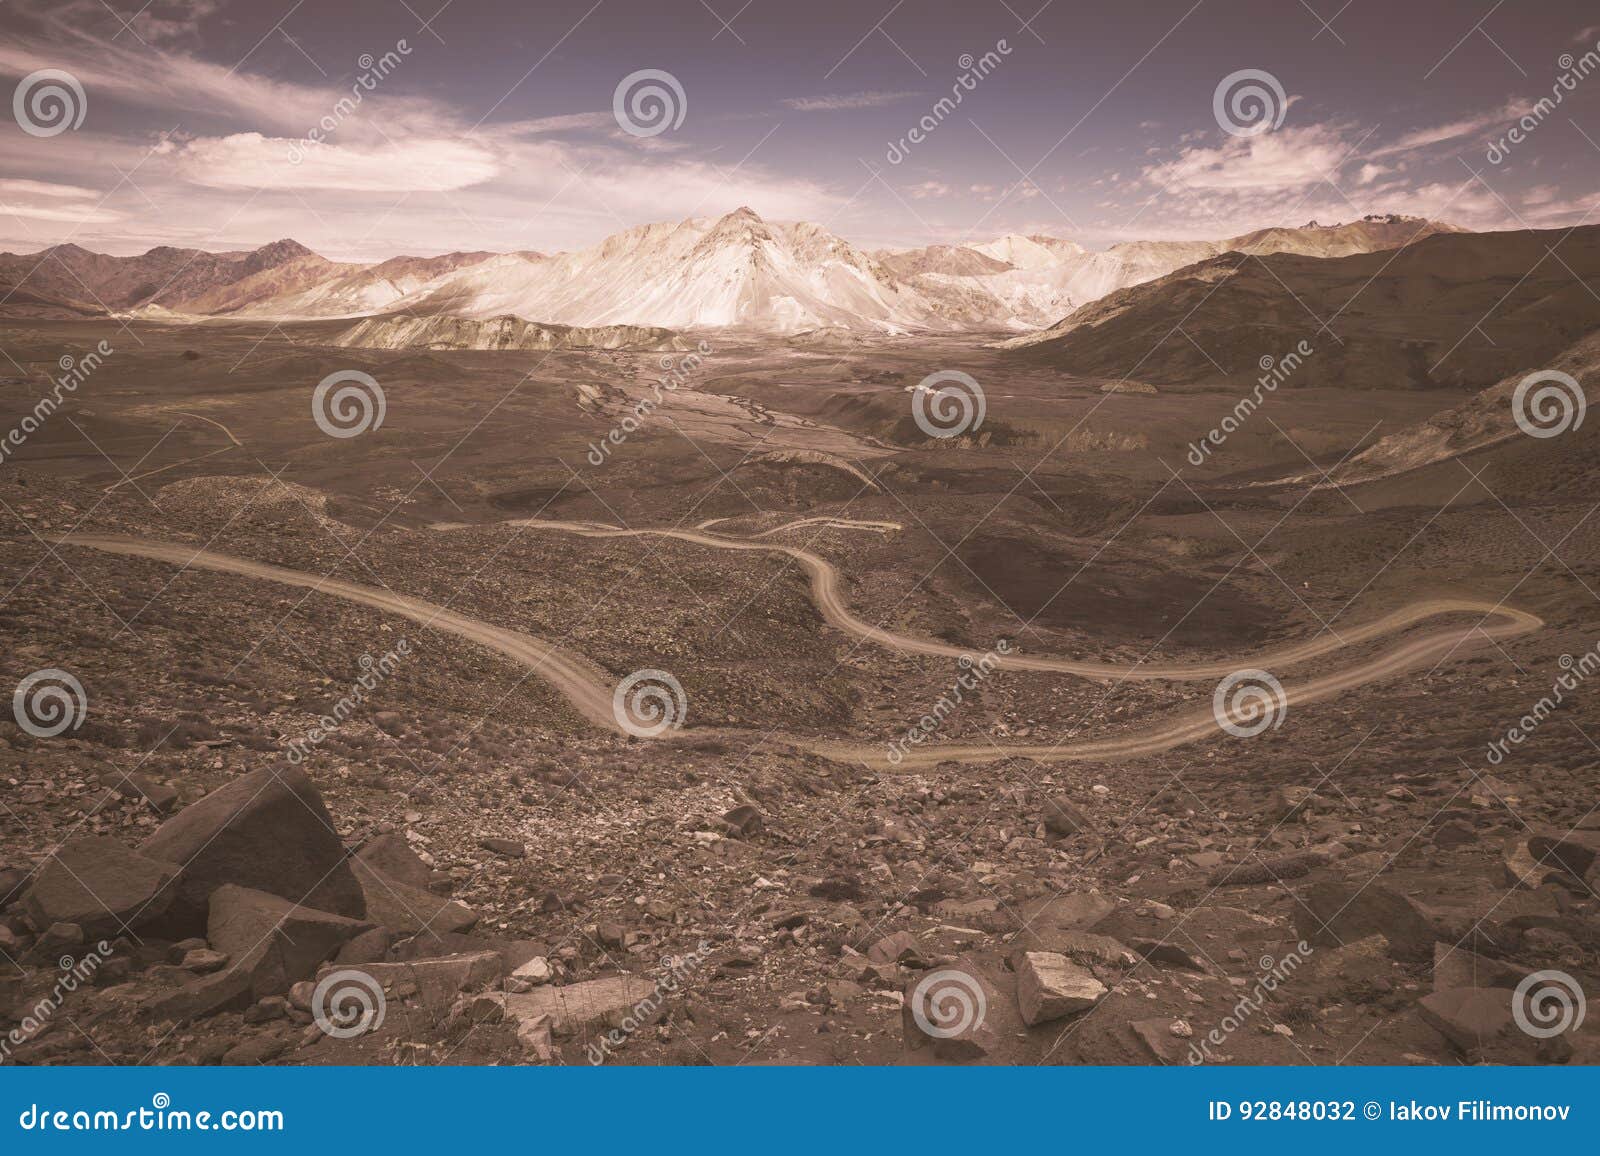 view of andes mountains, valle hermoso